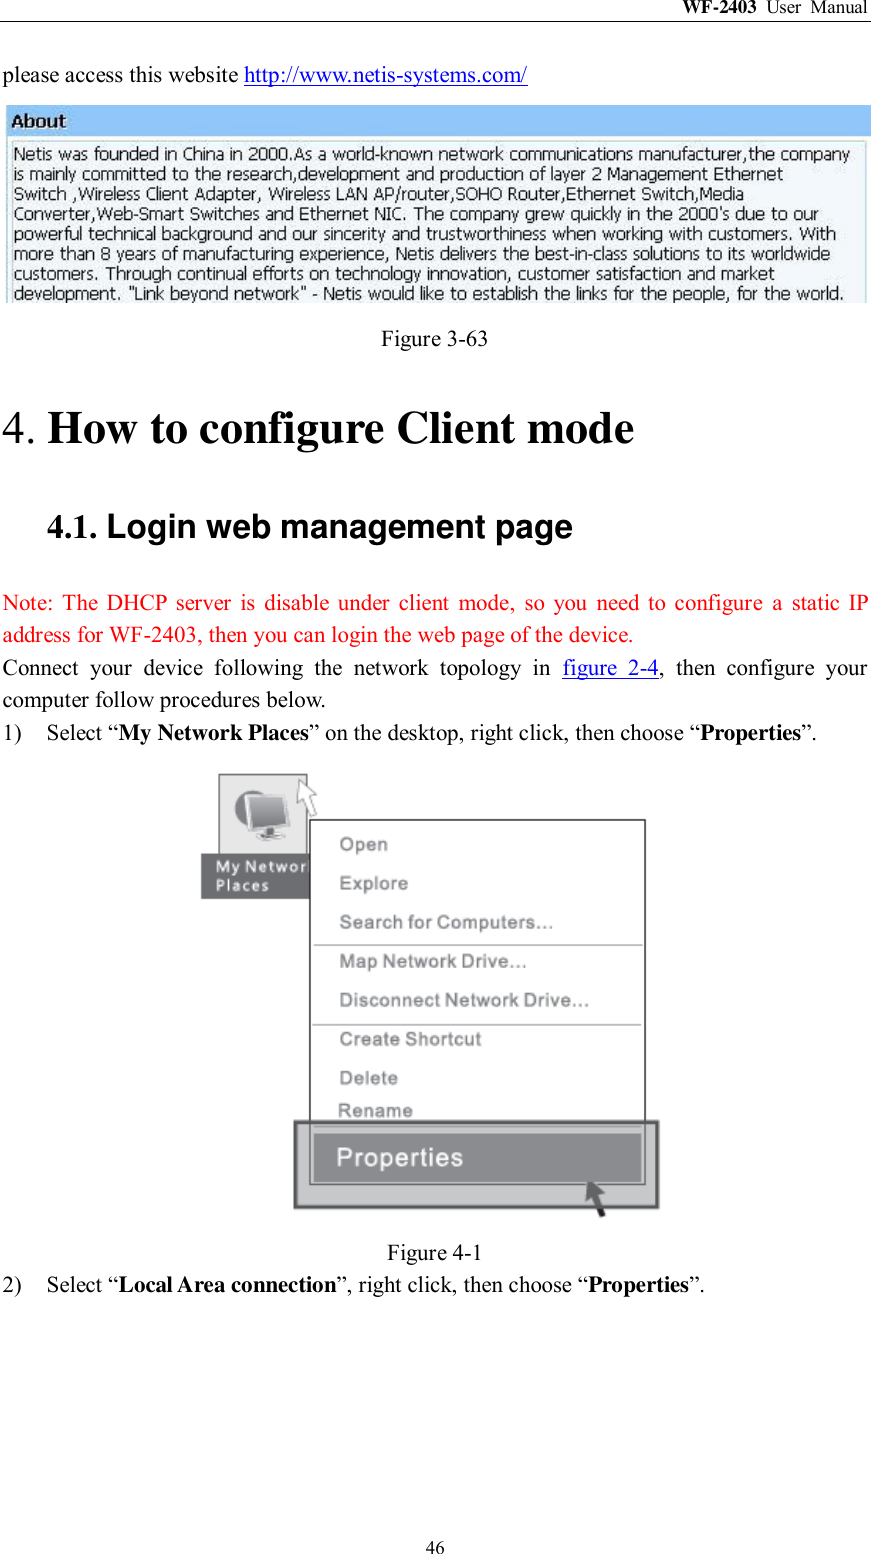 WF-2403  User  Manual  46 please access this website http://www.netis-systems.com/  Figure 3-63 4. How to configure Client mode 4.1. Login web management page Note:  The  DHCP  server  is  disable  under  client  mode,  so  you  need  to  configure  a  static  IP address for WF-2403, then you can login the web page of the device. Connect  your  device  following  the  network  topology  in  figure  2-4,  then  configure  your computer follow procedures below. 1) Select “My Network Places” on the desktop, right click, then choose “Properties”.  Figure 4-1 2) Select “Local Area connection”, right click, then choose “Properties”. 